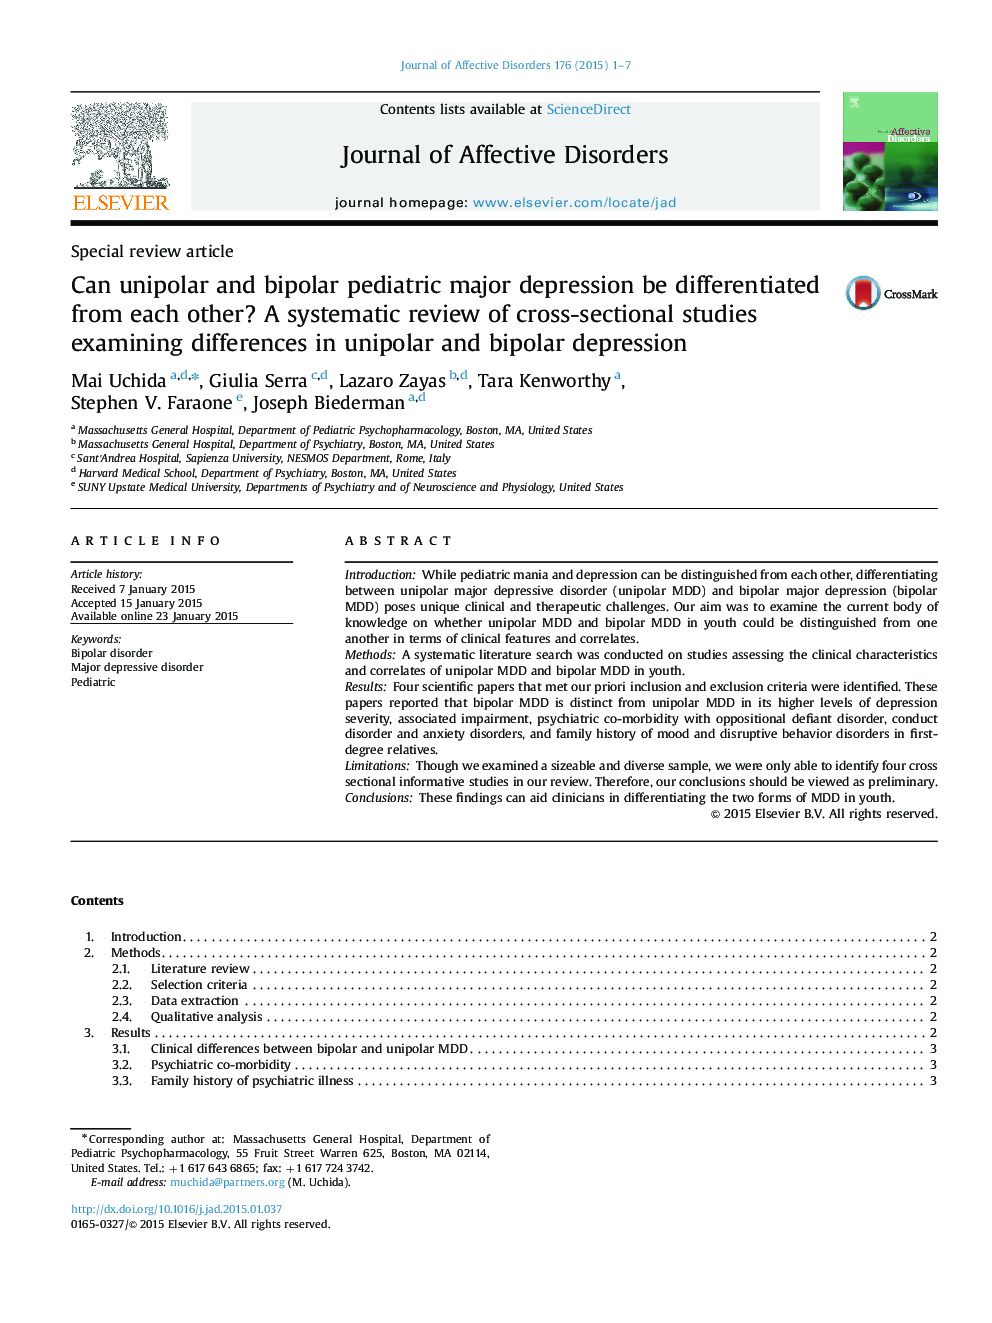 Can unipolar and bipolar pediatric major depression be differentiated from each other? A systematic review of cross-sectional studies examining differences in unipolar and bipolar depression